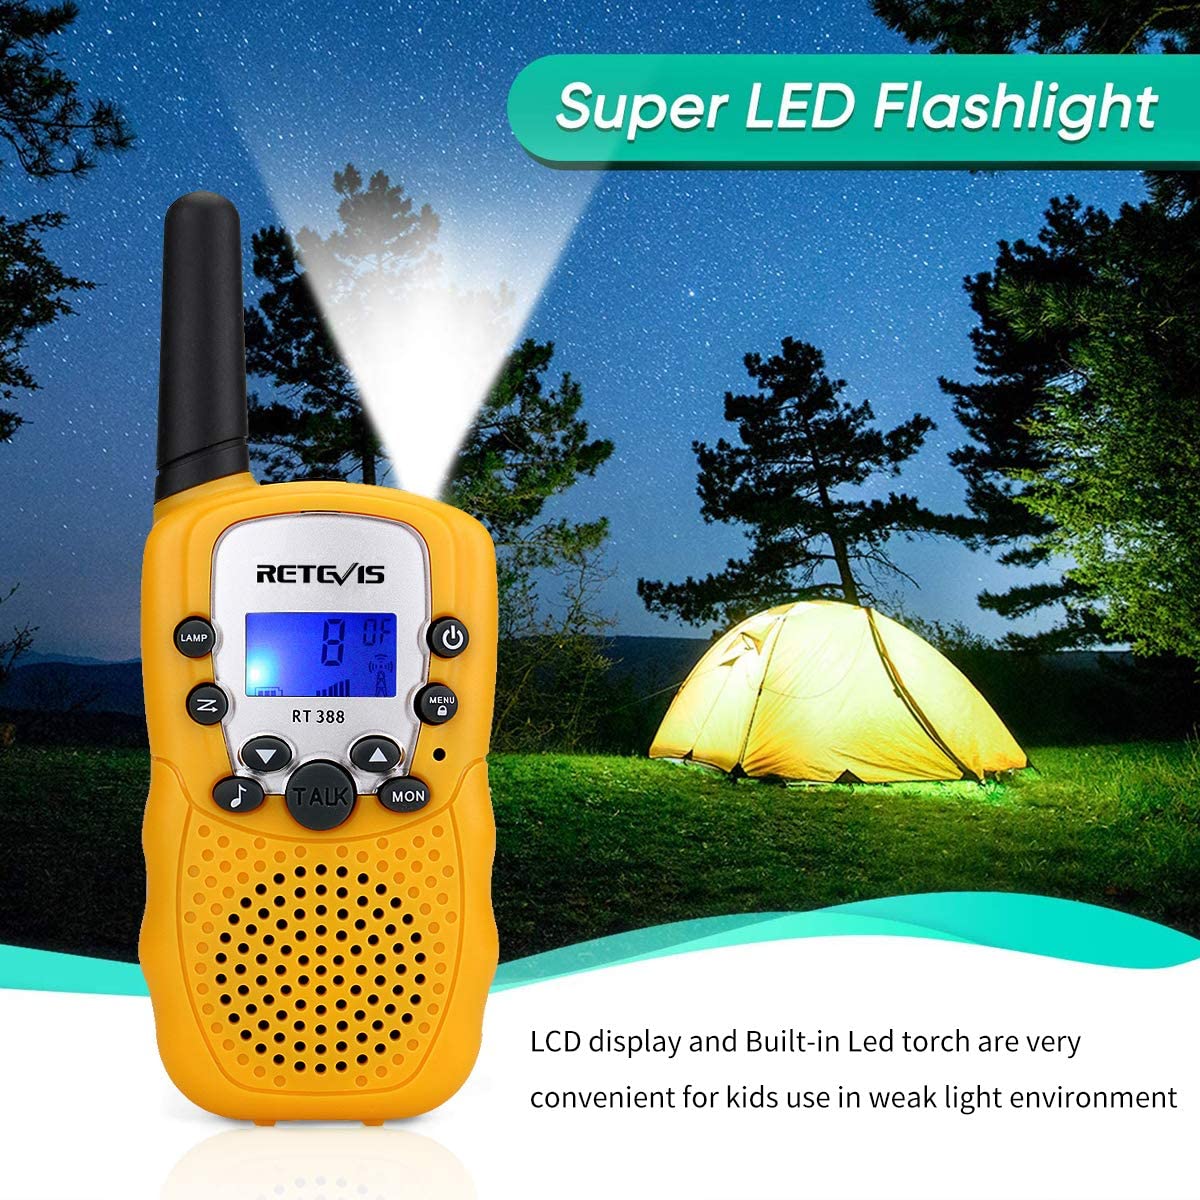 3 Miles Range for Kids Camping Outdoor Adventures Blue 2 Pack Camo Exterior Vox Box Voice Activated 2 Way Radio Toy with Backlit LCD Flashlight Hiking Nestling Kids Walkie Talkies